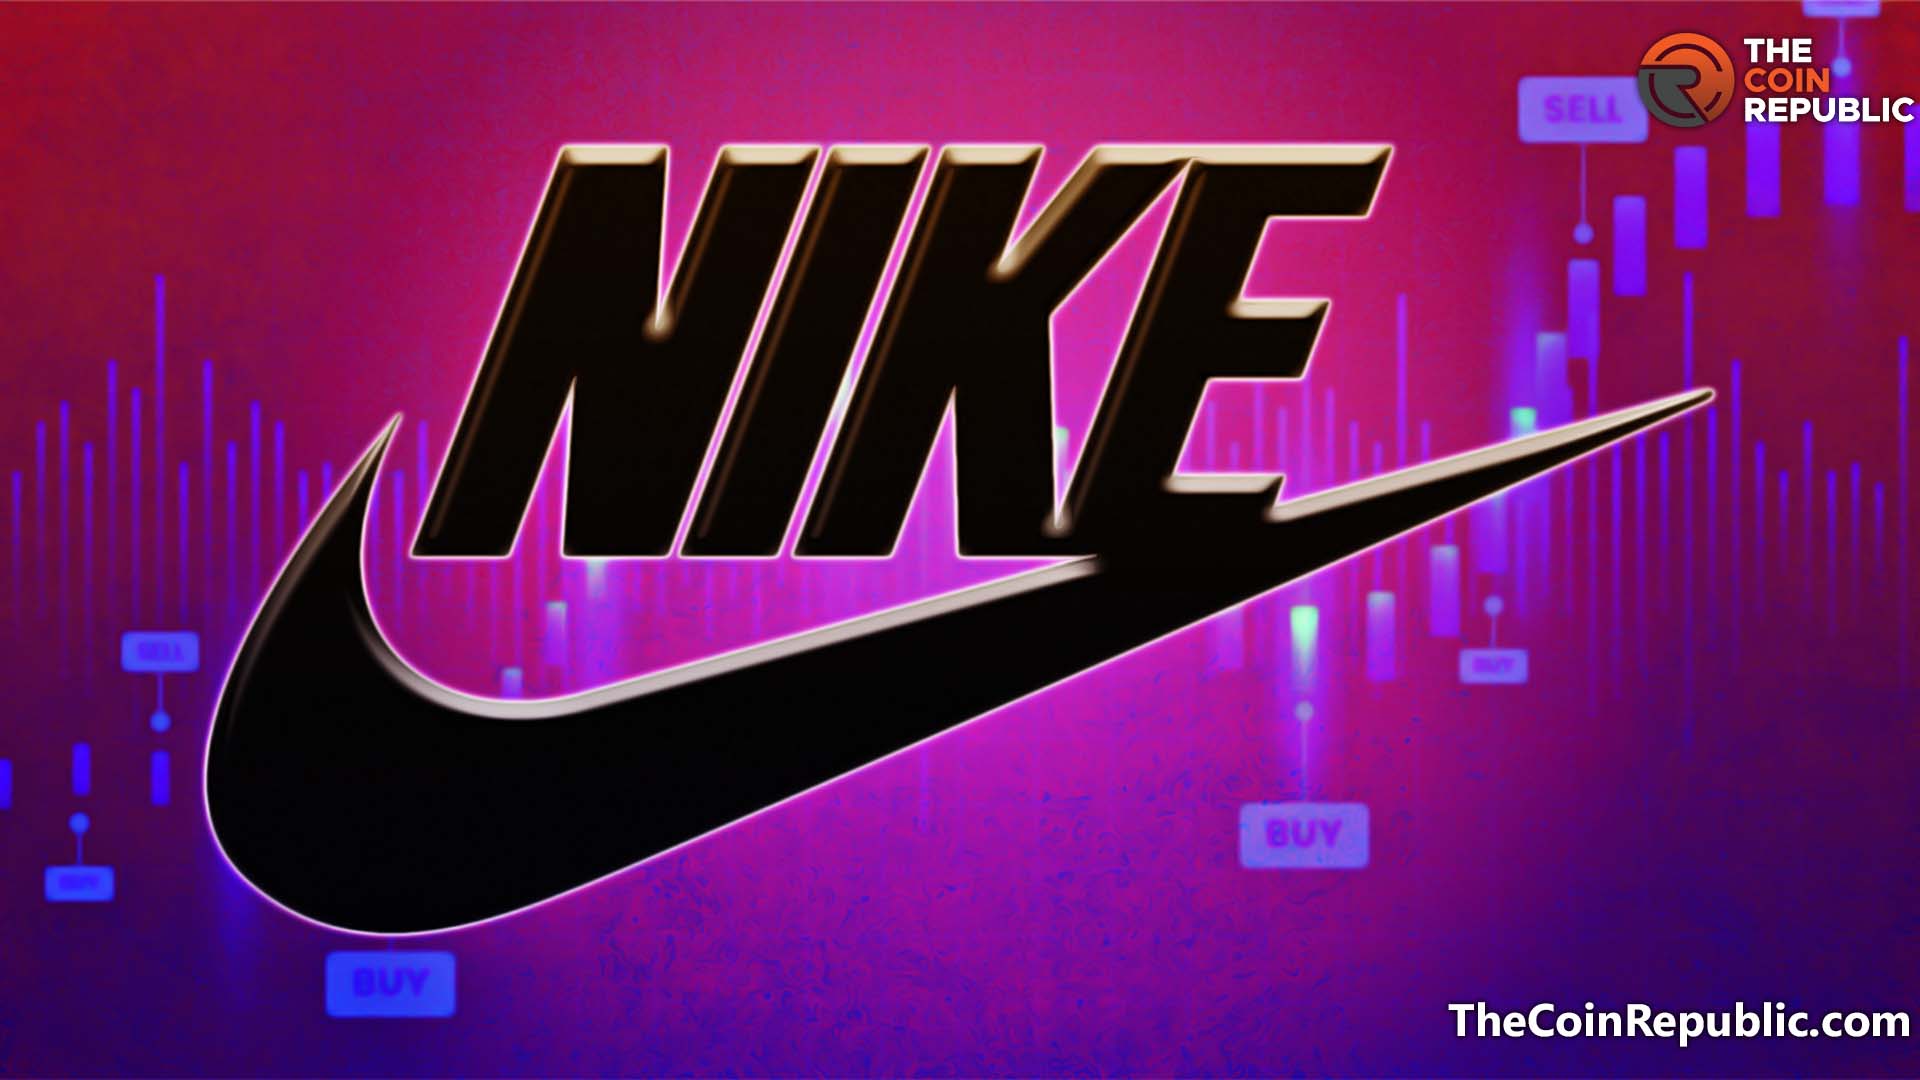 Direct Sales Leading Nike, Inc. — Is it about Time to Sell NKE Shares, Nike Stock Price May Return?